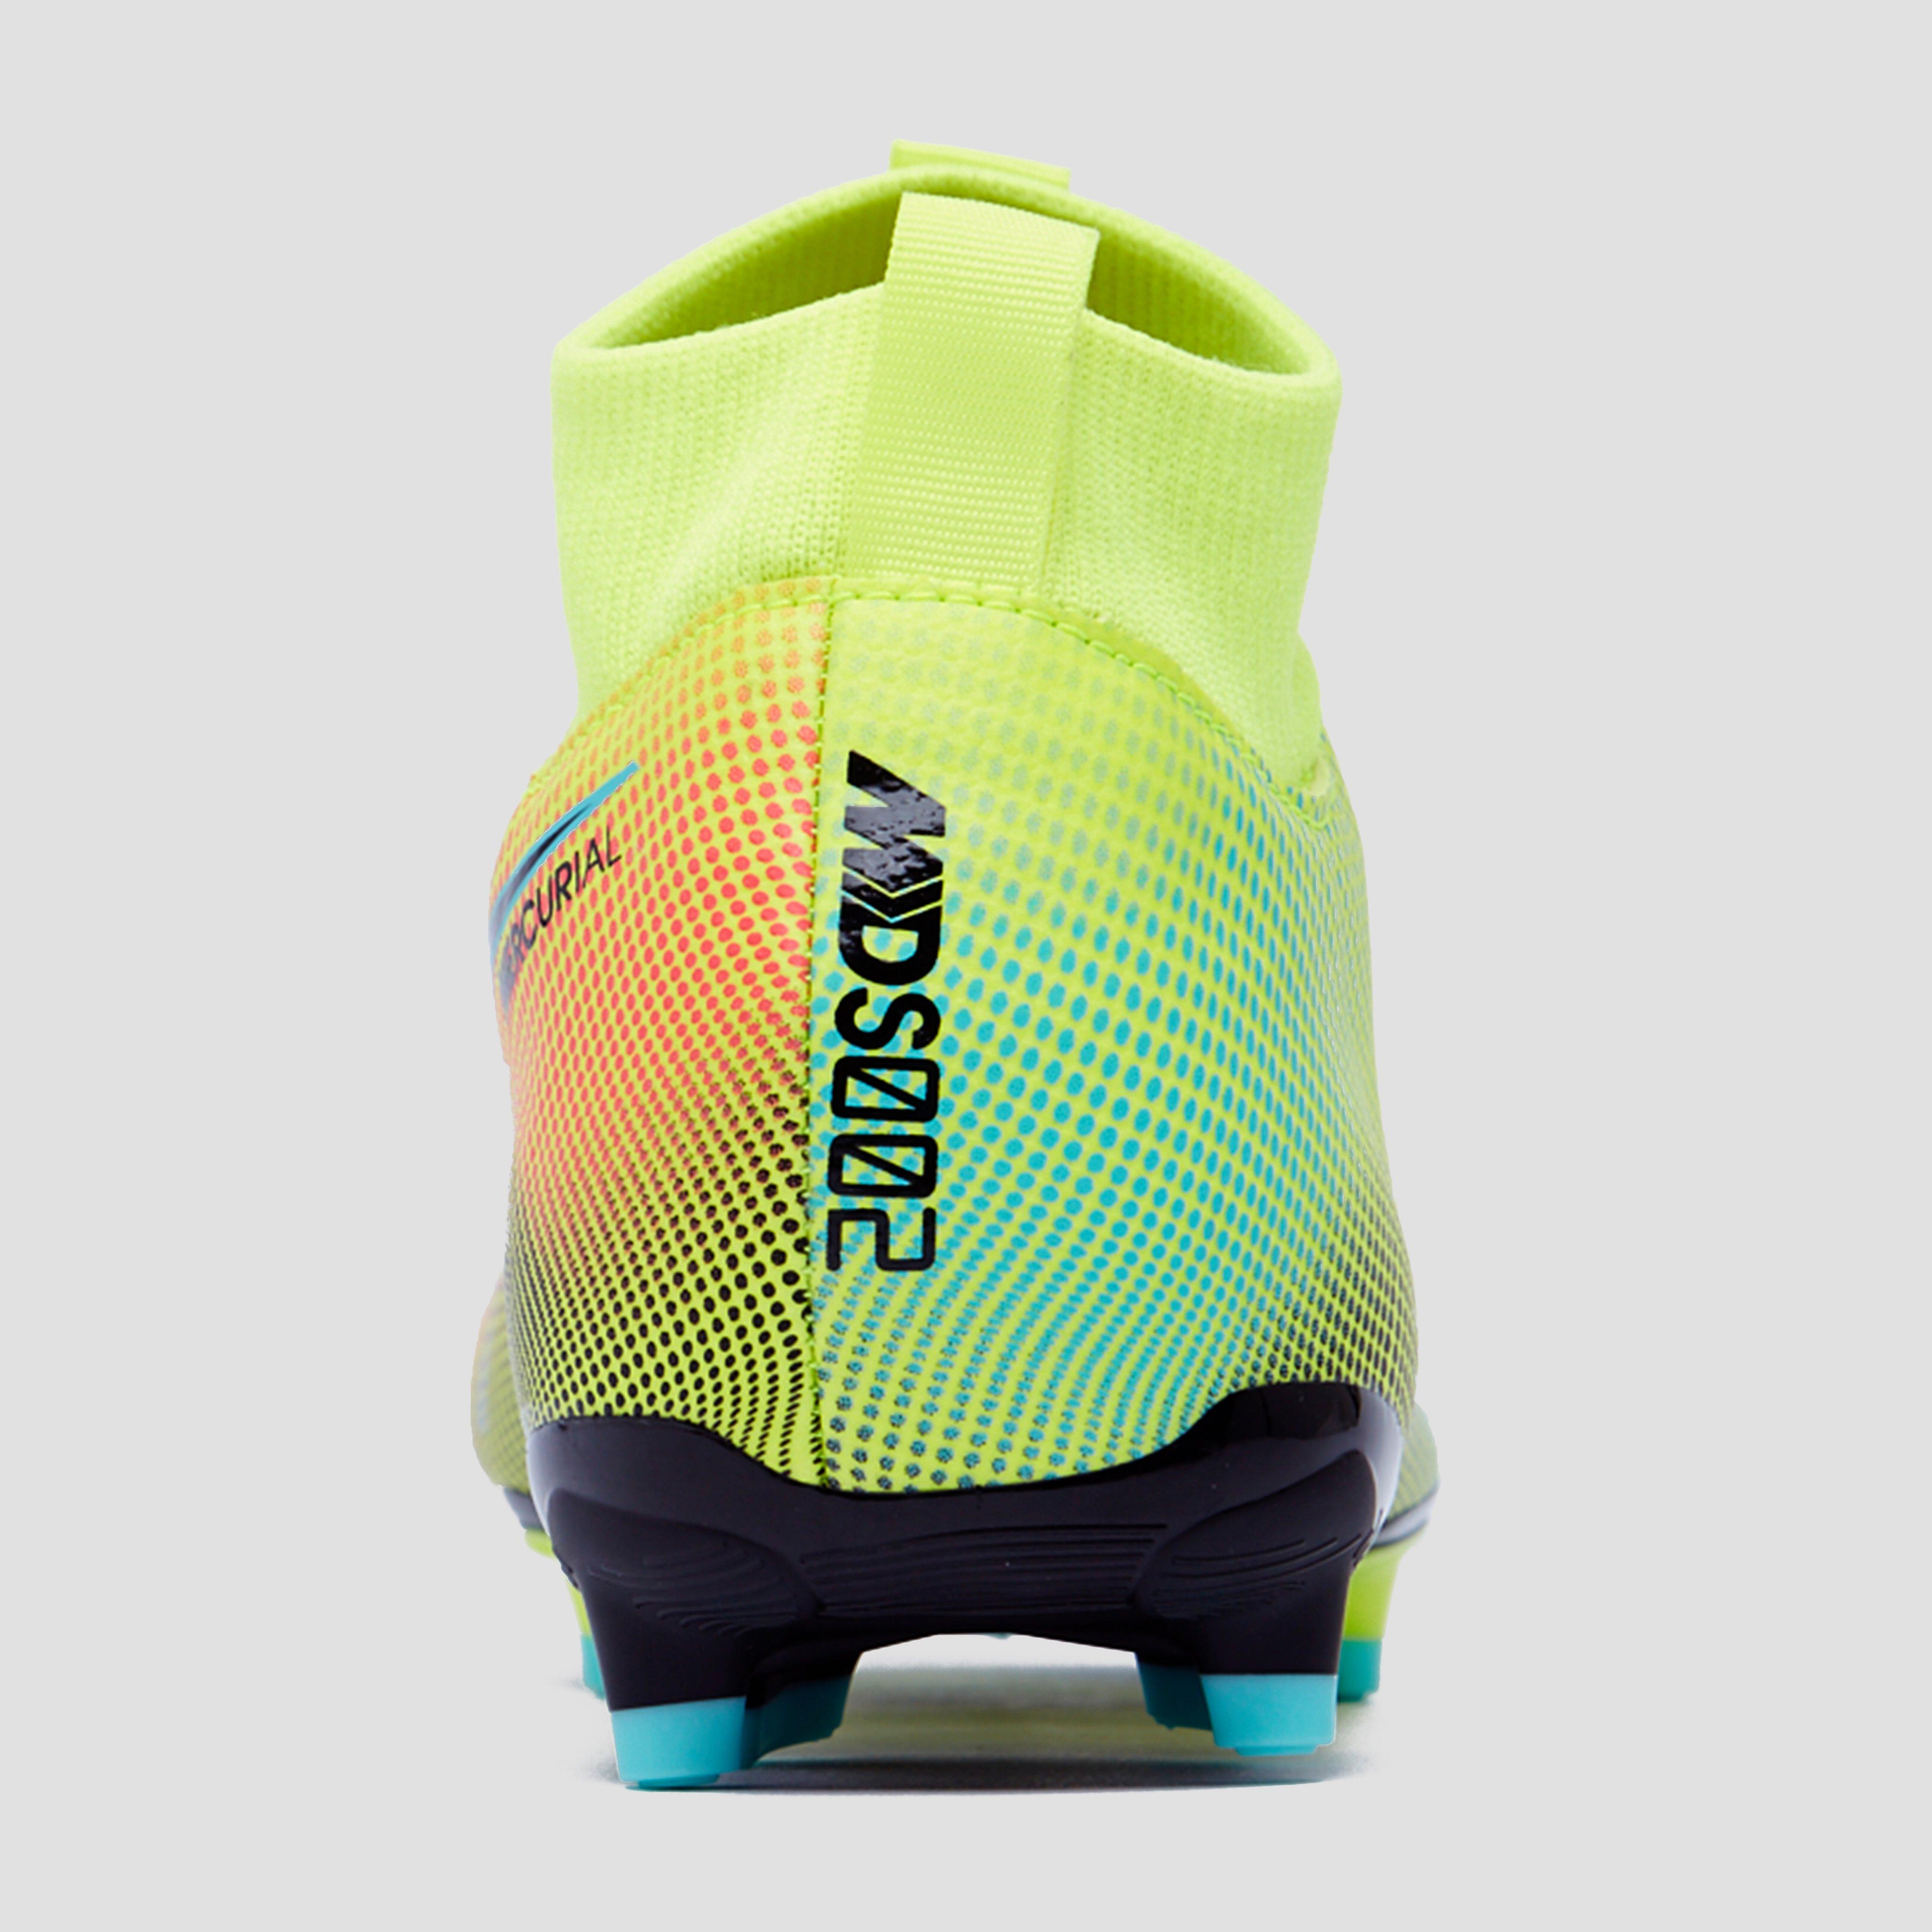 Nike Mercurial Superfly 7 Academy MDS TF Soccer Shoe.